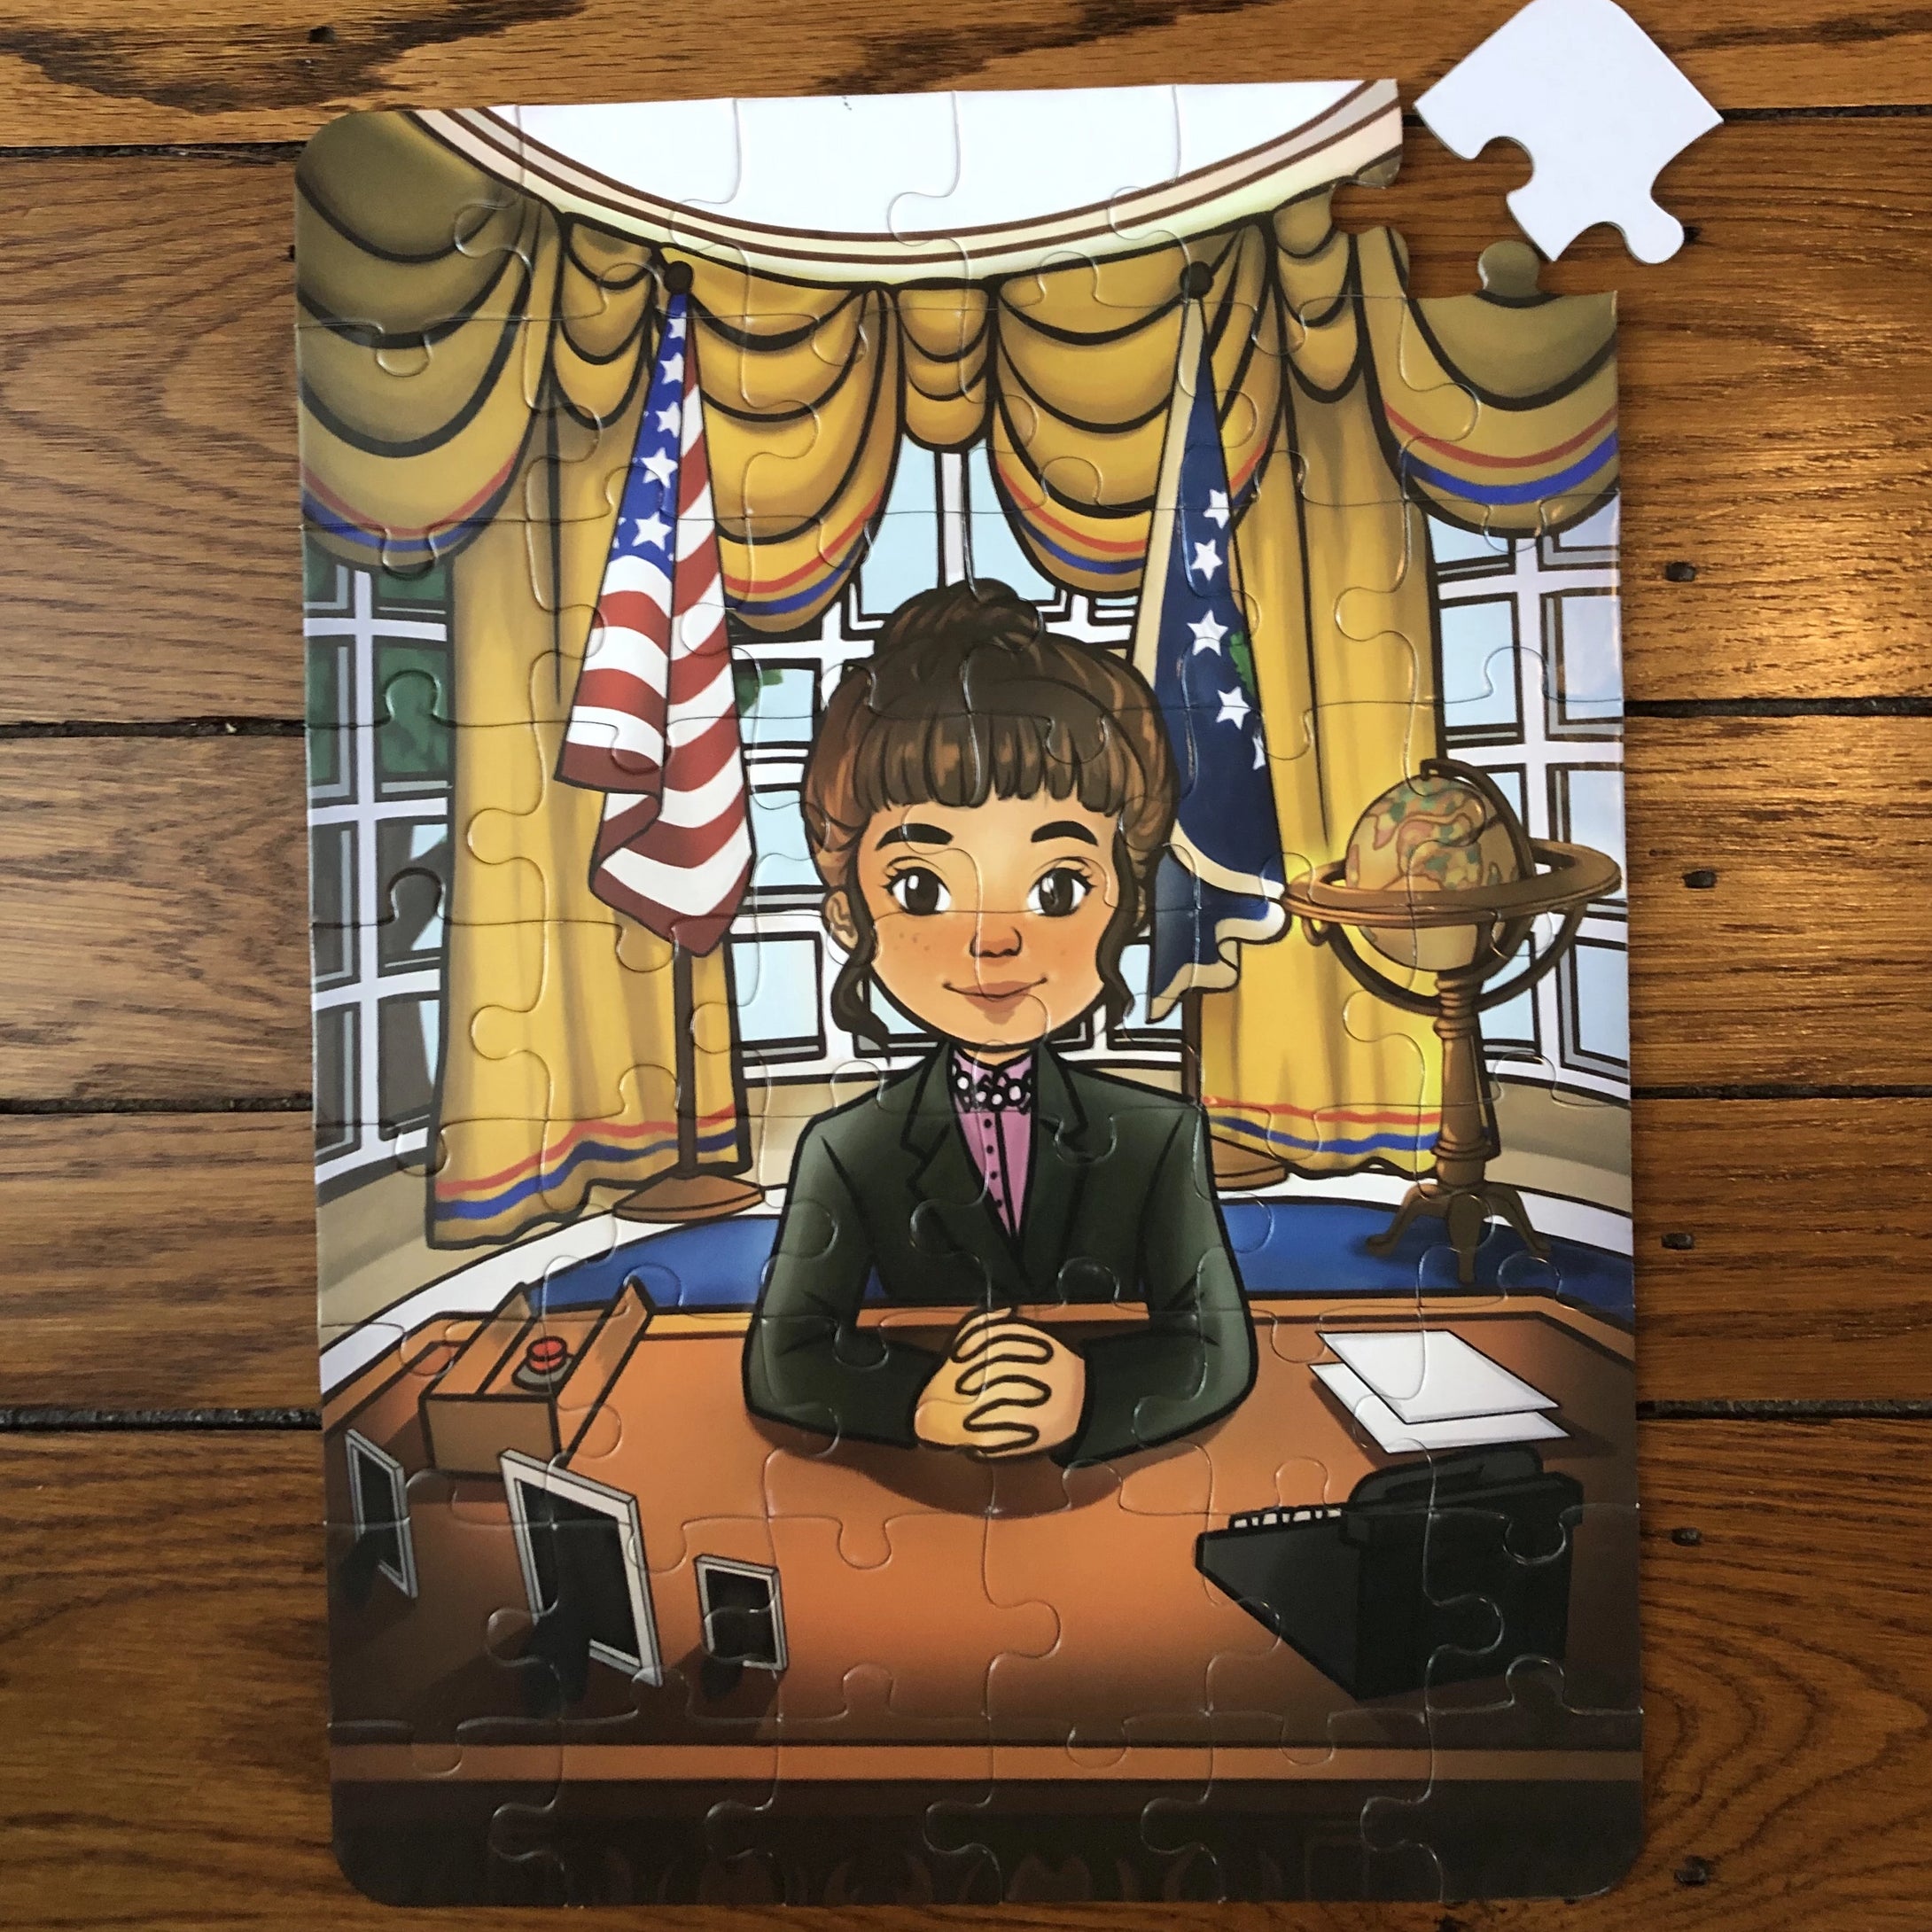 Girl President - Oval Office (12in x 16.5in w/54 pieces)